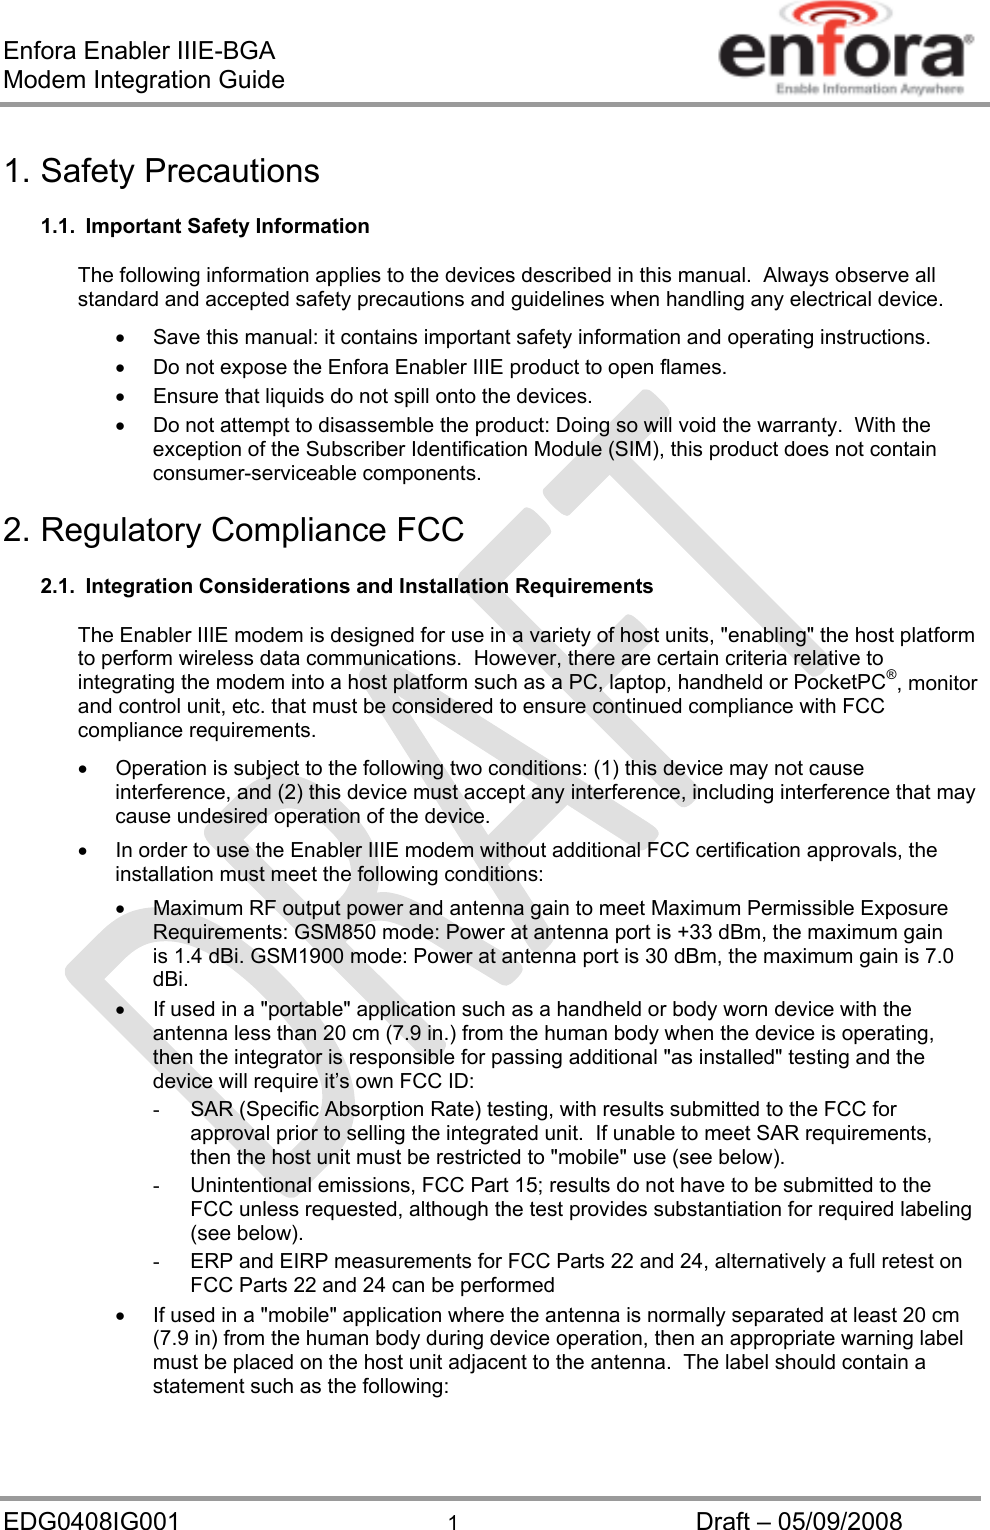 Enfora Enabler IIIE-BGA Modem Integration Guide EDG0408IG001  1  Draft – 05/09/2008 1. Safety Precautions 1.1.  Important Safety Information The following information applies to the devices described in this manual.  Always observe all standard and accepted safety precautions and guidelines when handling any electrical device.   Save this manual: it contains important safety information and operating instructions.   Do not expose the Enfora Enabler IIIE product to open flames.   Ensure that liquids do not spill onto the devices.   Do not attempt to disassemble the product: Doing so will void the warranty.  With the exception of the Subscriber Identification Module (SIM), this product does not contain consumer-serviceable components. 2. Regulatory Compliance FCC  2.1.  Integration Considerations and Installation Requirements The Enabler IIIE modem is designed for use in a variety of host units, &quot;enabling&quot; the host platform to perform wireless data communications.  However, there are certain criteria relative to integrating the modem into a host platform such as a PC, laptop, handheld or PocketPC®, monitor and control unit, etc. that must be considered to ensure continued compliance with FCC compliance requirements.   Operation is subject to the following two conditions: (1) this device may not cause interference, and (2) this device must accept any interference, including interference that may cause undesired operation of the device.   In order to use the Enabler IIIE modem without additional FCC certification approvals, the installation must meet the following conditions:   Maximum RF output power and antenna gain to meet Maximum Permissible Exposure Requirements: GSM850 mode: Power at antenna port is +33 dBm, the maximum gain is 1.4 dBi. GSM1900 mode: Power at antenna port is 30 dBm, the maximum gain is 7.0 dBi.   If used in a &quot;portable&quot; application such as a handheld or body worn device with the antenna less than 20 cm (7.9 in.) from the human body when the device is operating, then the integrator is responsible for passing additional &quot;as installed&quot; testing and the device will require it’s own FCC ID: -  SAR (Specific Absorption Rate) testing, with results submitted to the FCC for approval prior to selling the integrated unit.  If unable to meet SAR requirements, then the host unit must be restricted to &quot;mobile&quot; use (see below). -  Unintentional emissions, FCC Part 15; results do not have to be submitted to the FCC unless requested, although the test provides substantiation for required labeling (see below). -  ERP and EIRP measurements for FCC Parts 22 and 24, alternatively a full retest on FCC Parts 22 and 24 can be performed   If used in a &quot;mobile&quot; application where the antenna is normally separated at least 20 cm (7.9 in) from the human body during device operation, then an appropriate warning label must be placed on the host unit adjacent to the antenna.  The label should contain a statement such as the following: 